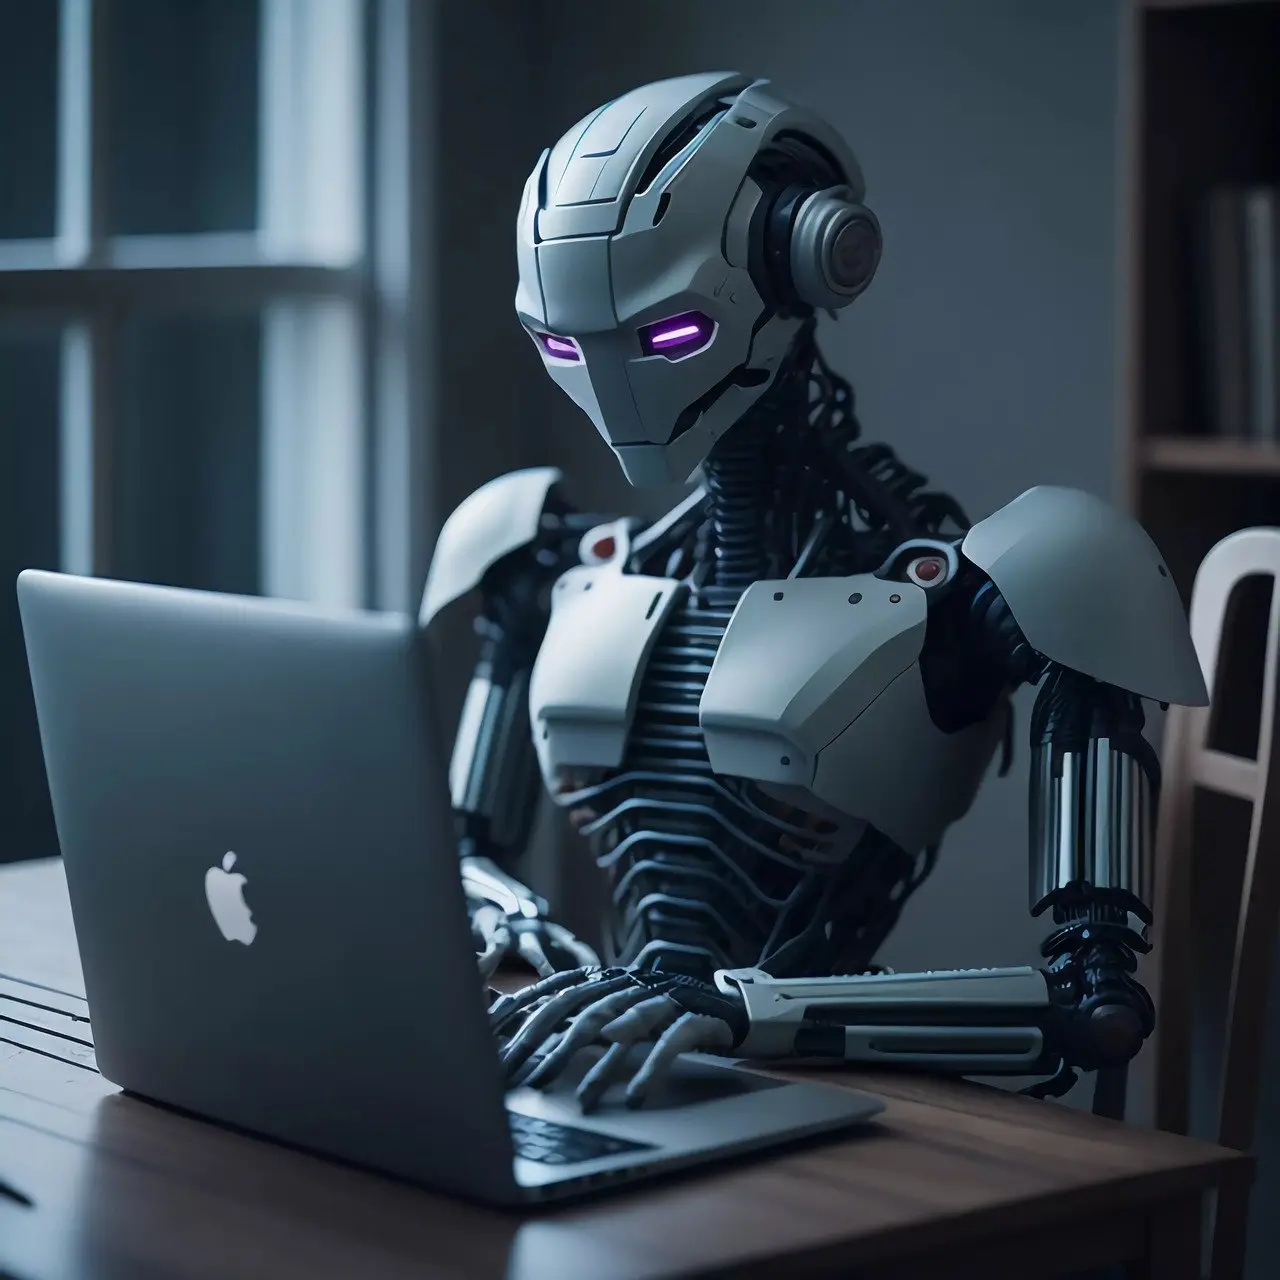 An AI robot is performing tasks on the laptop.